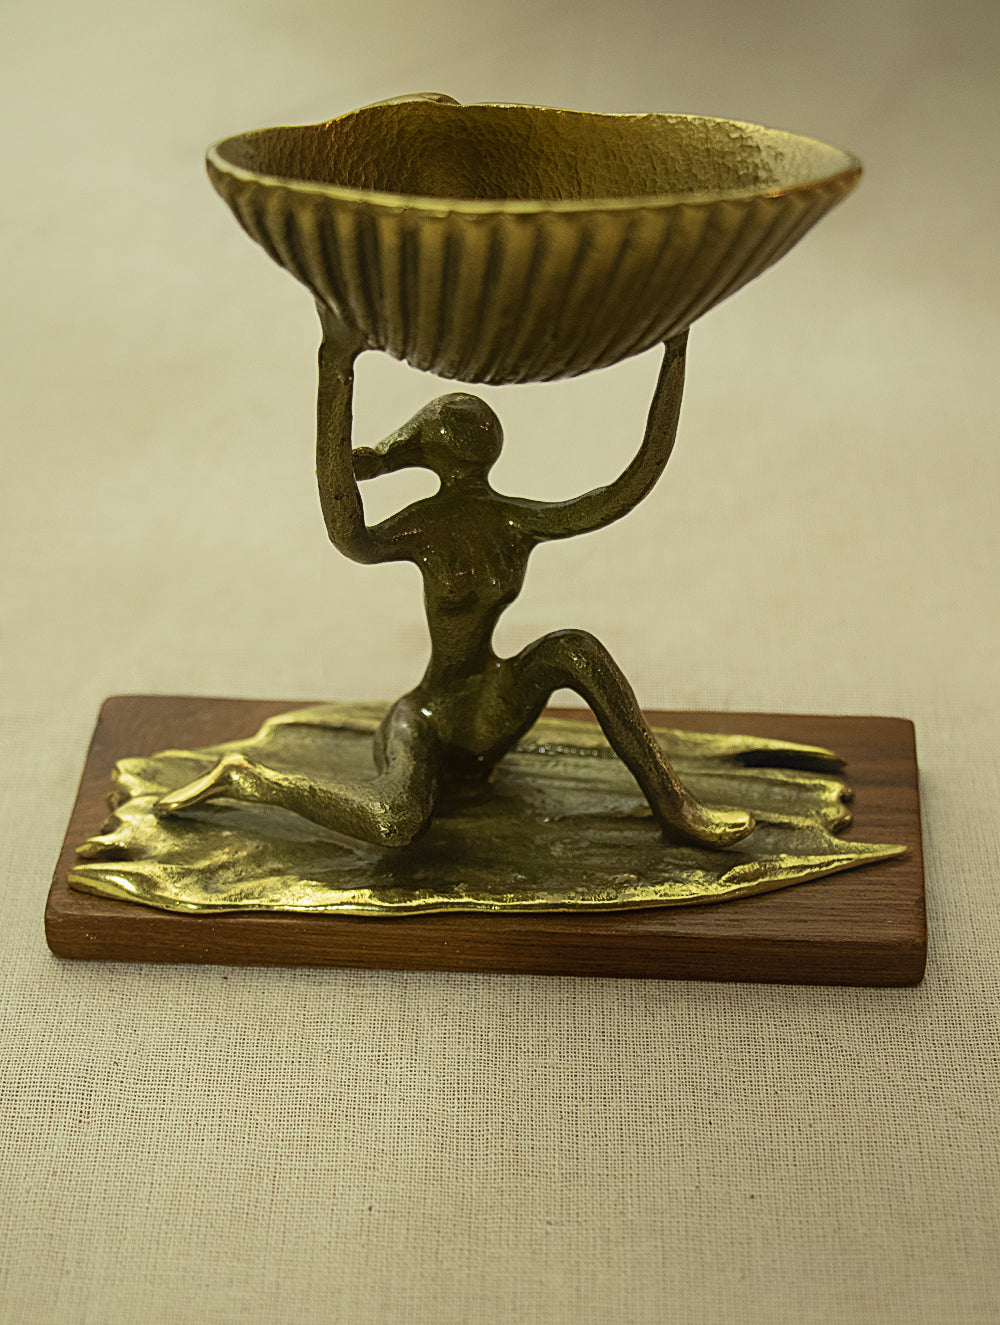 Load image into Gallery viewer, Brass Sculpture - Lady Holding Seashell - The India Craft House 